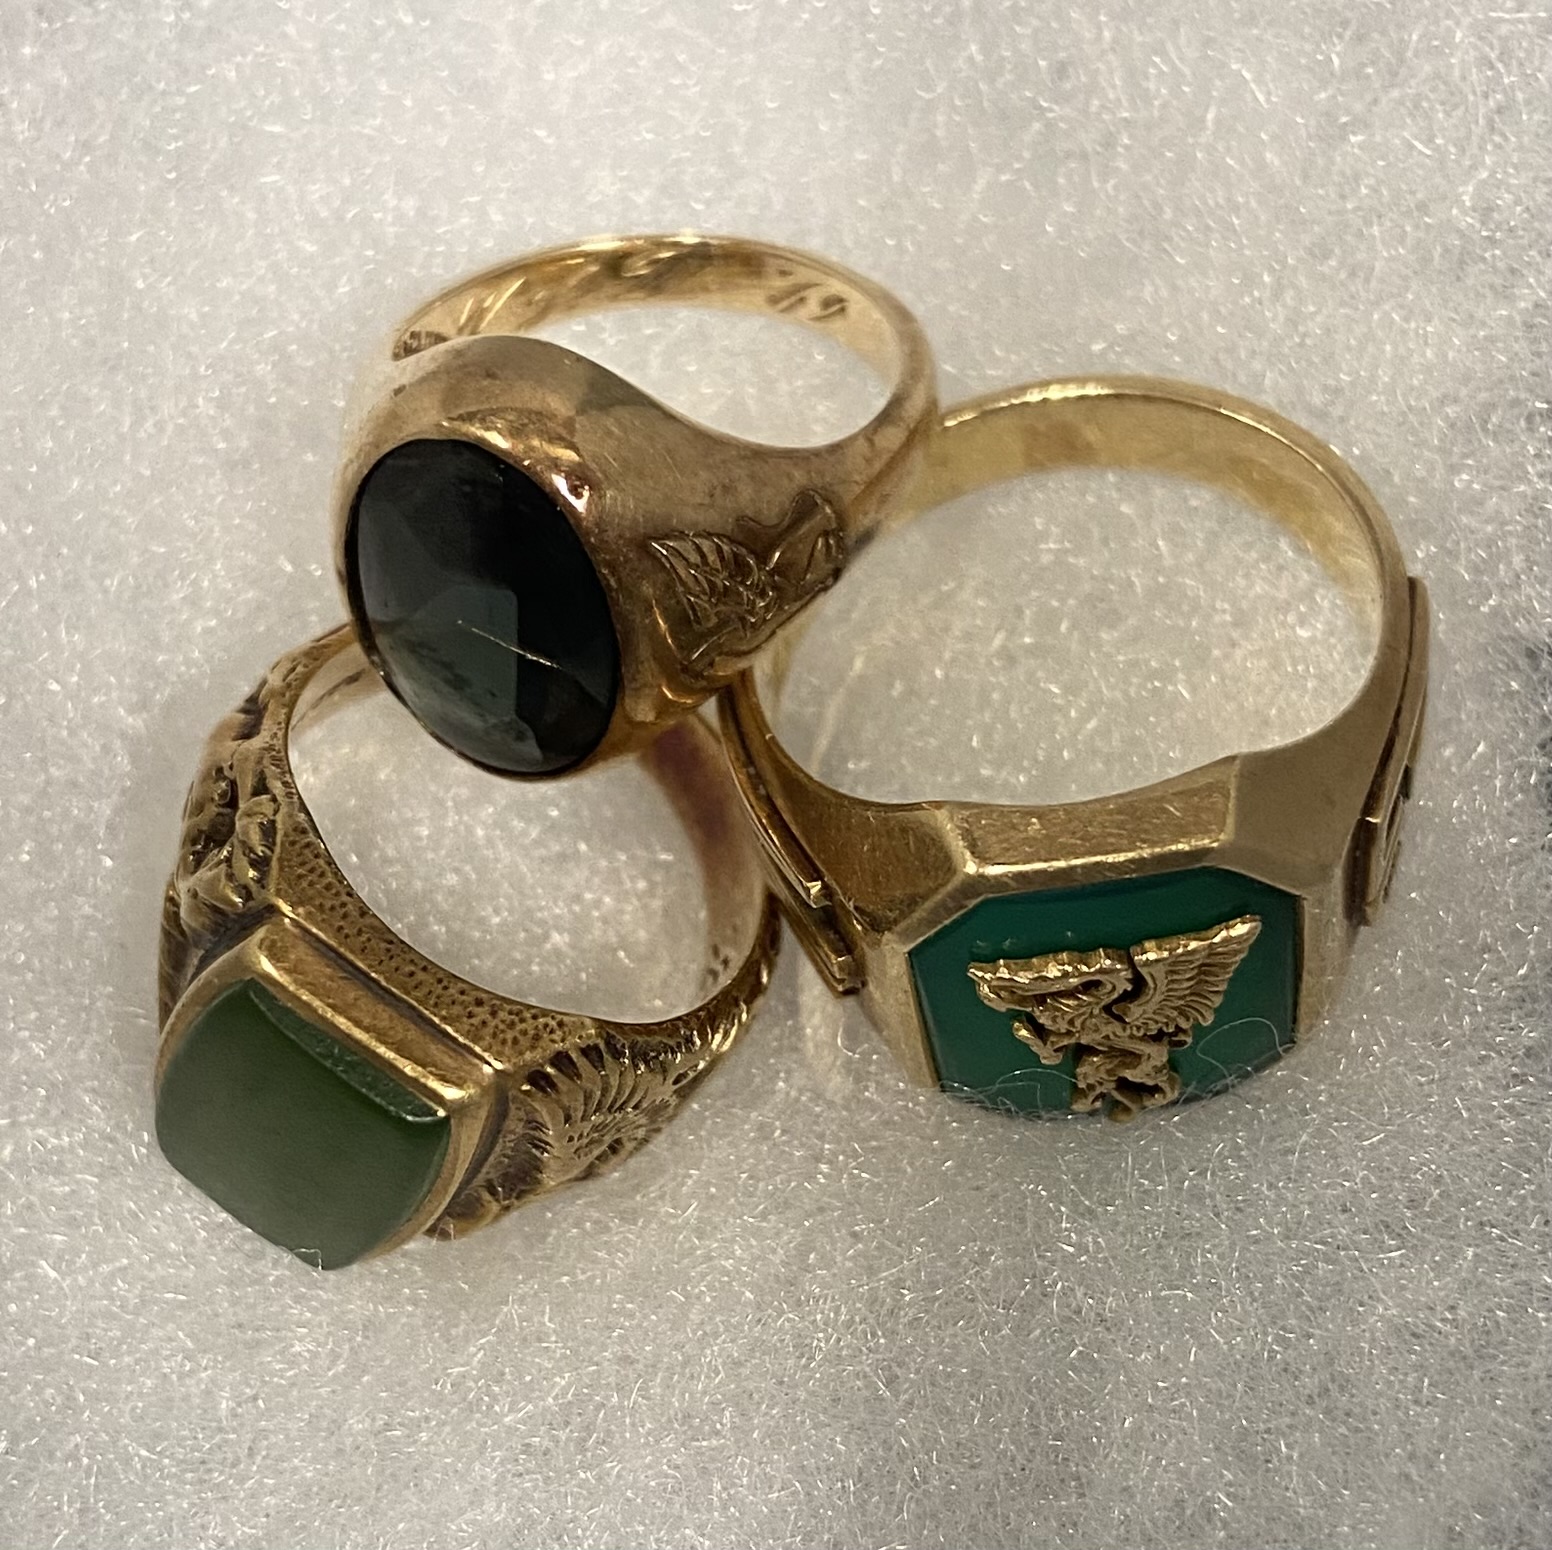 Three gold rings with green stones of different shapes. 